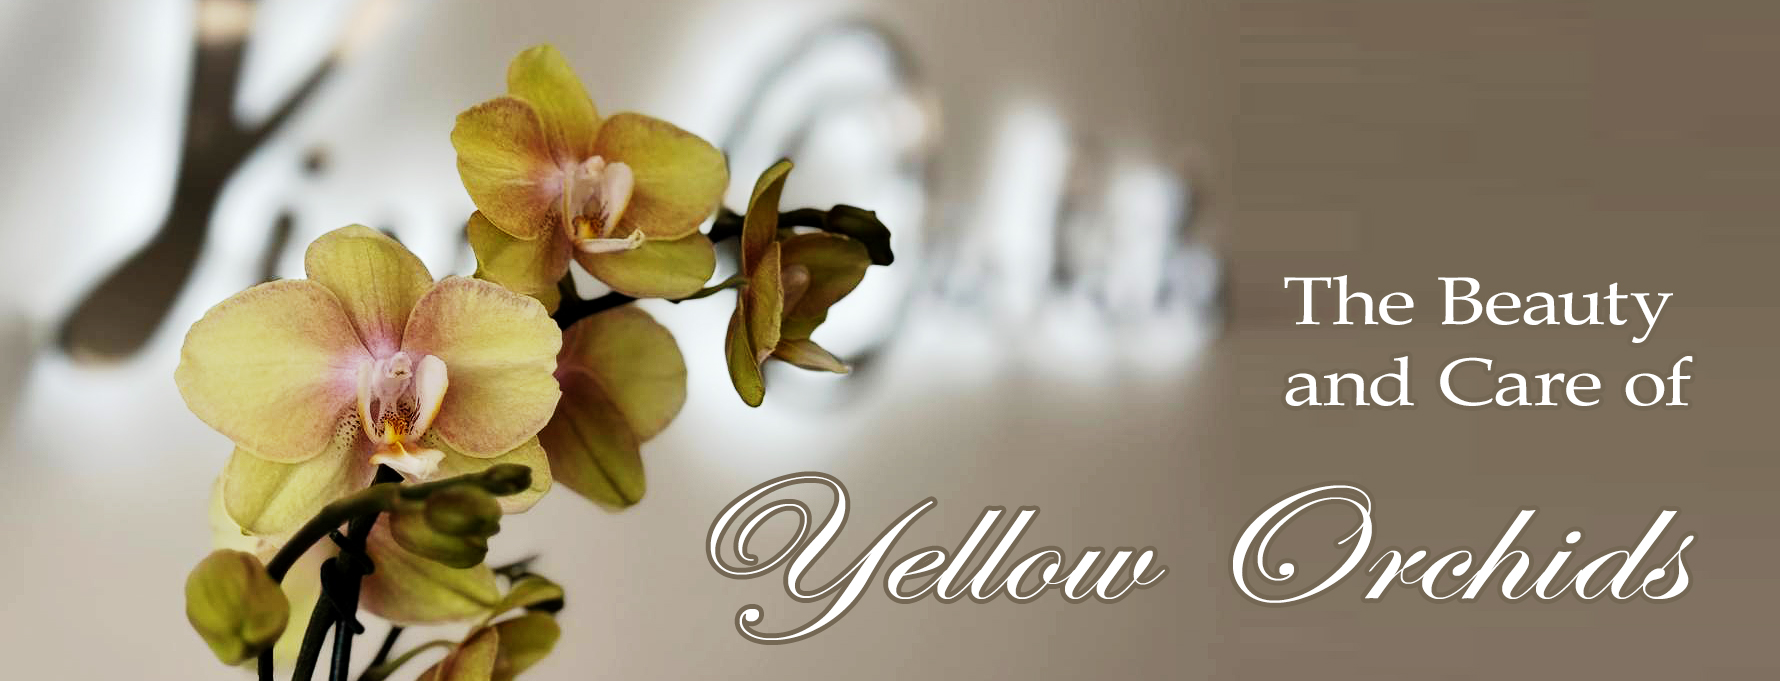 Yellow Orchids in Boca RatonThe Beauty and Care of Yellow Orchids